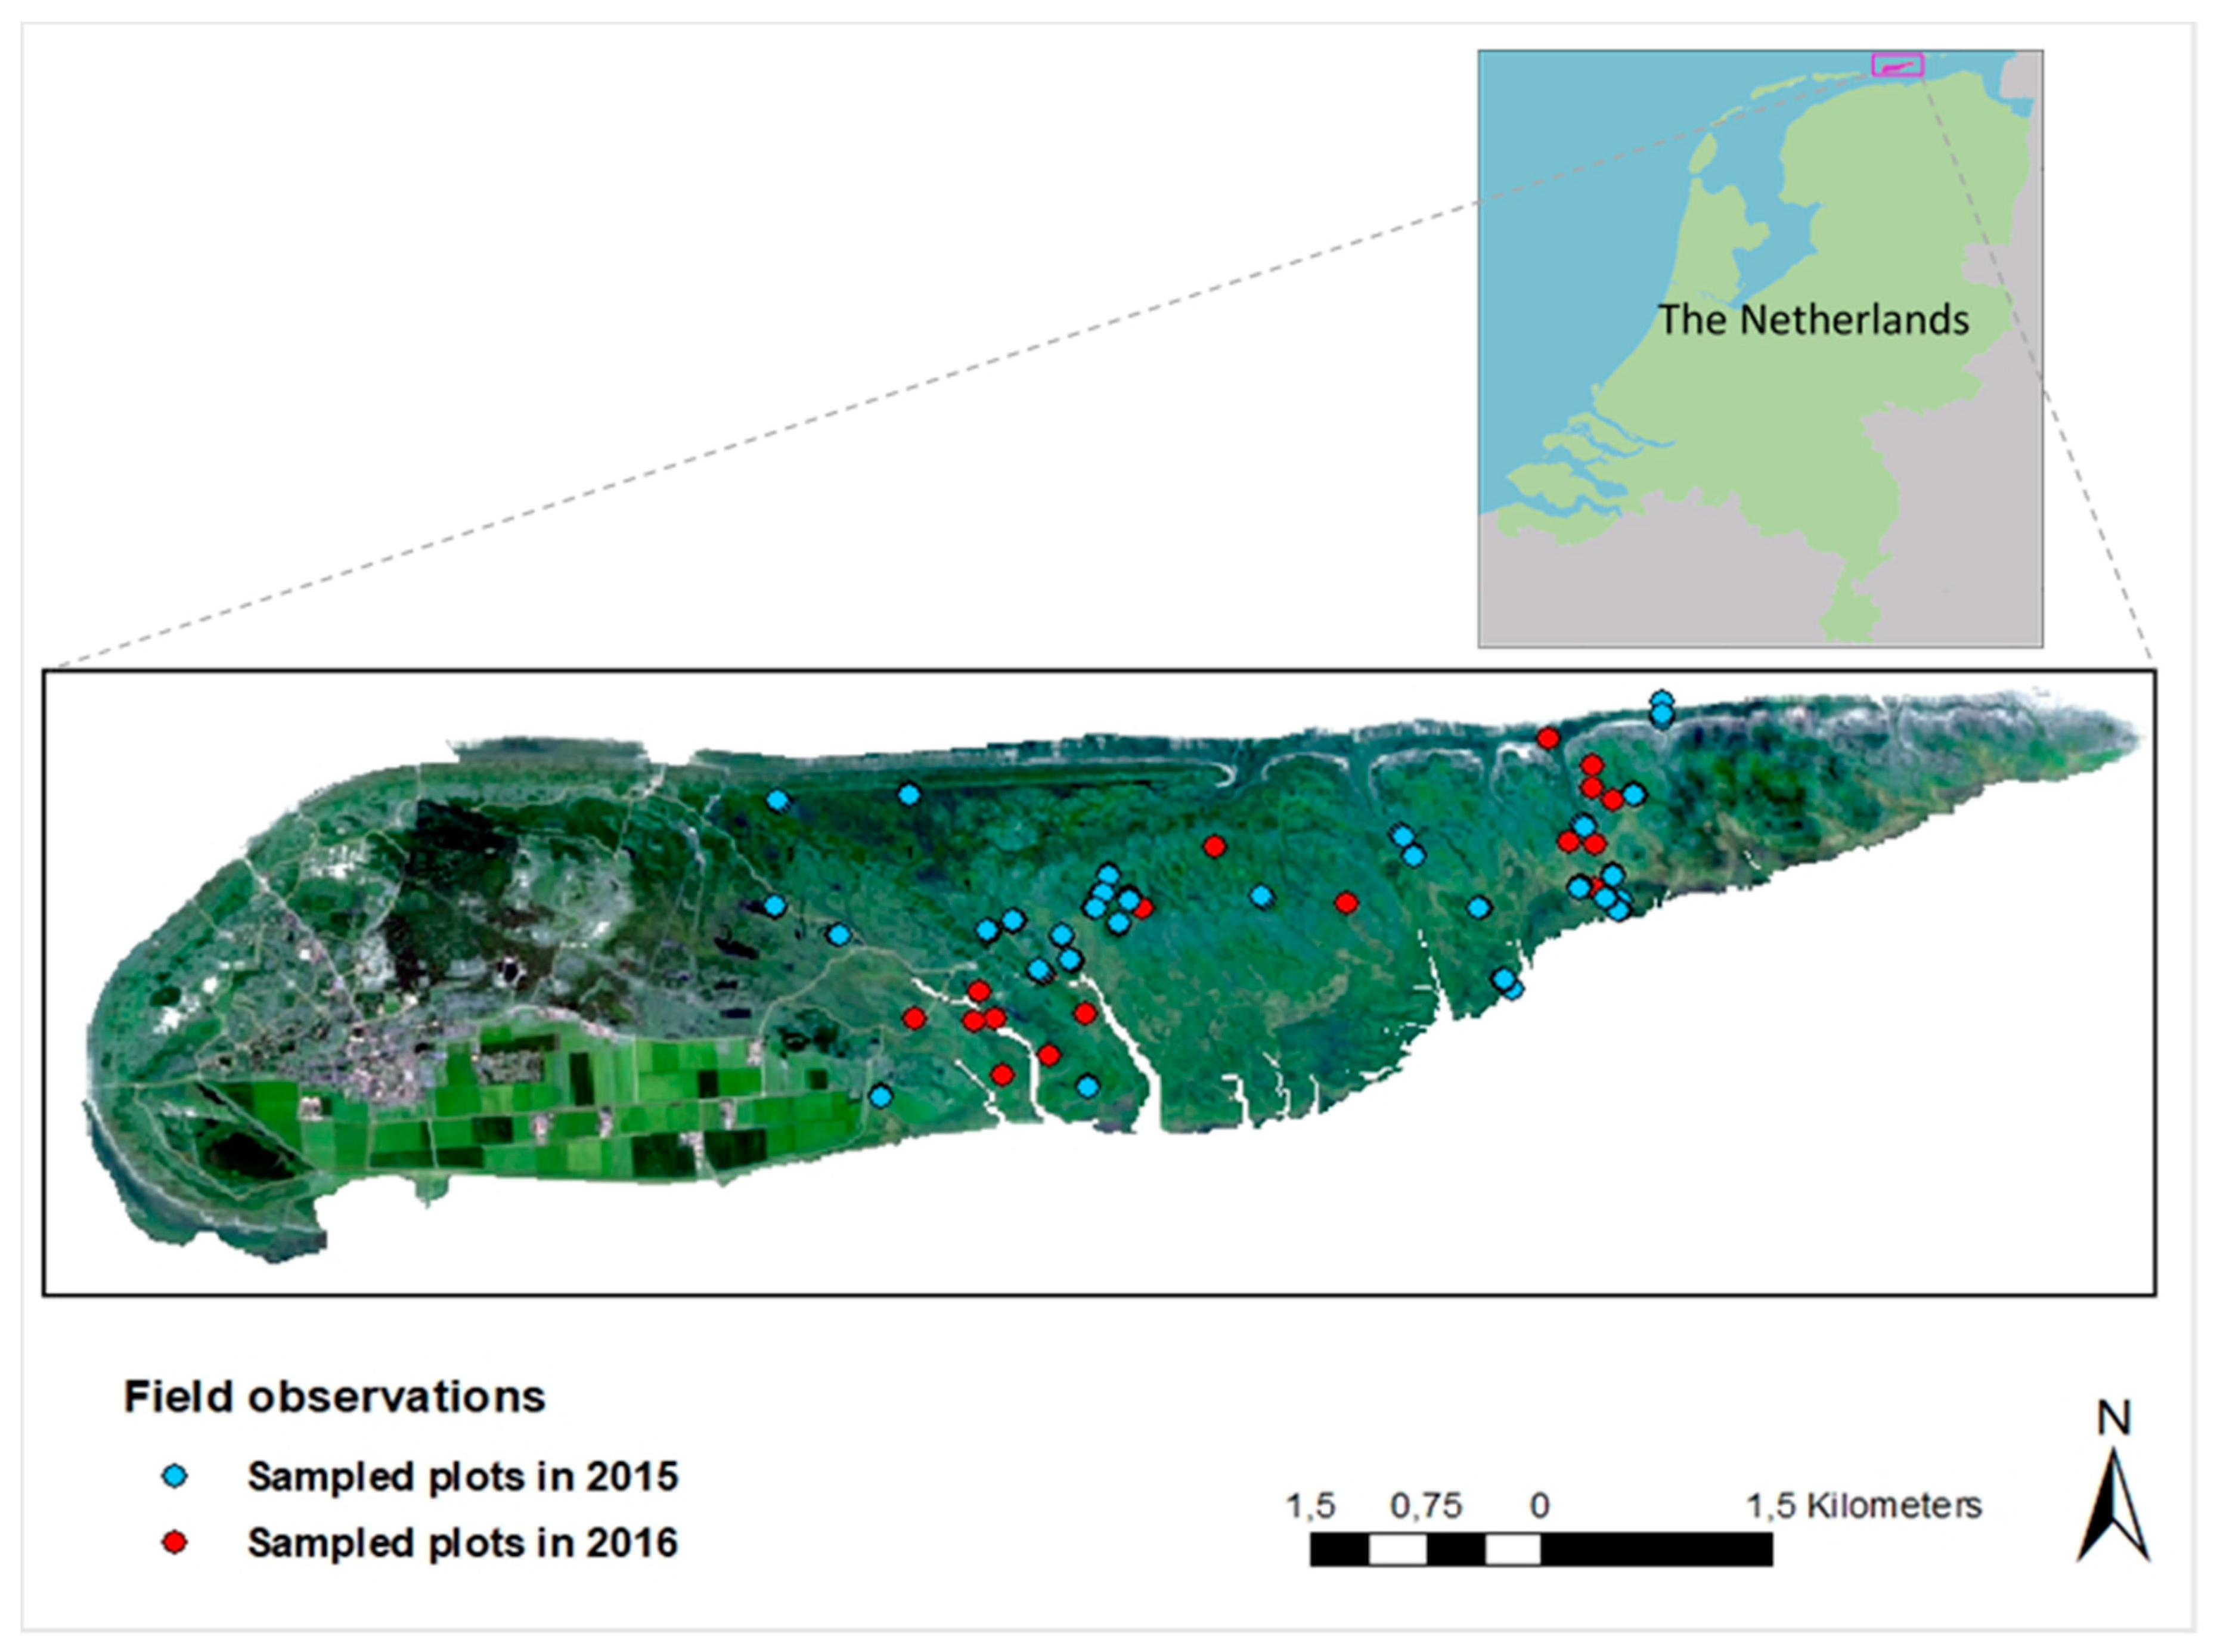 Remote Sensing | Free Full-Text | Analysis of Sentinel-2 and RapidEye for  Retrieval of Leaf Area Index in a Saltmarsh Using a Radiative Transfer Model